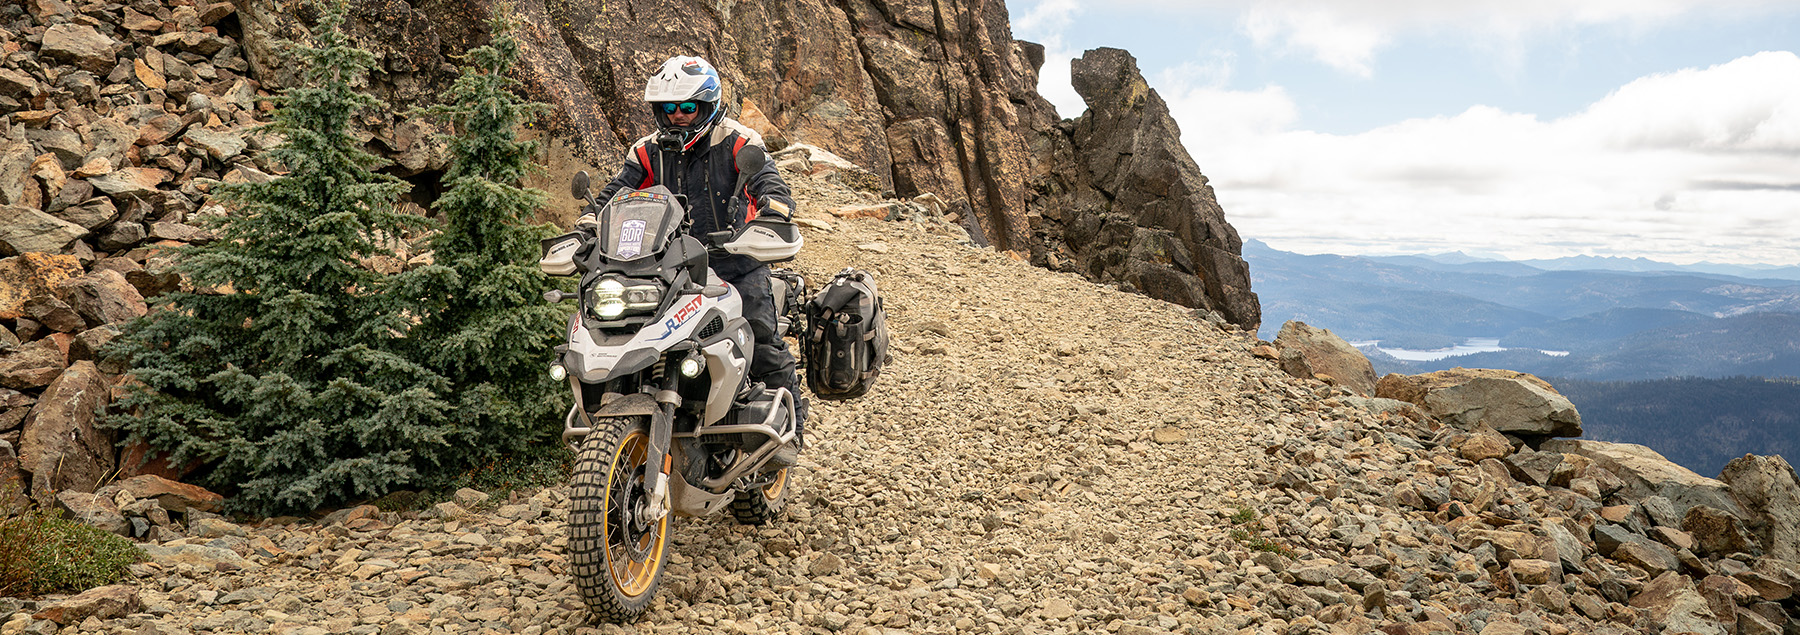 A BMW Motorcycle riding on a mountain.